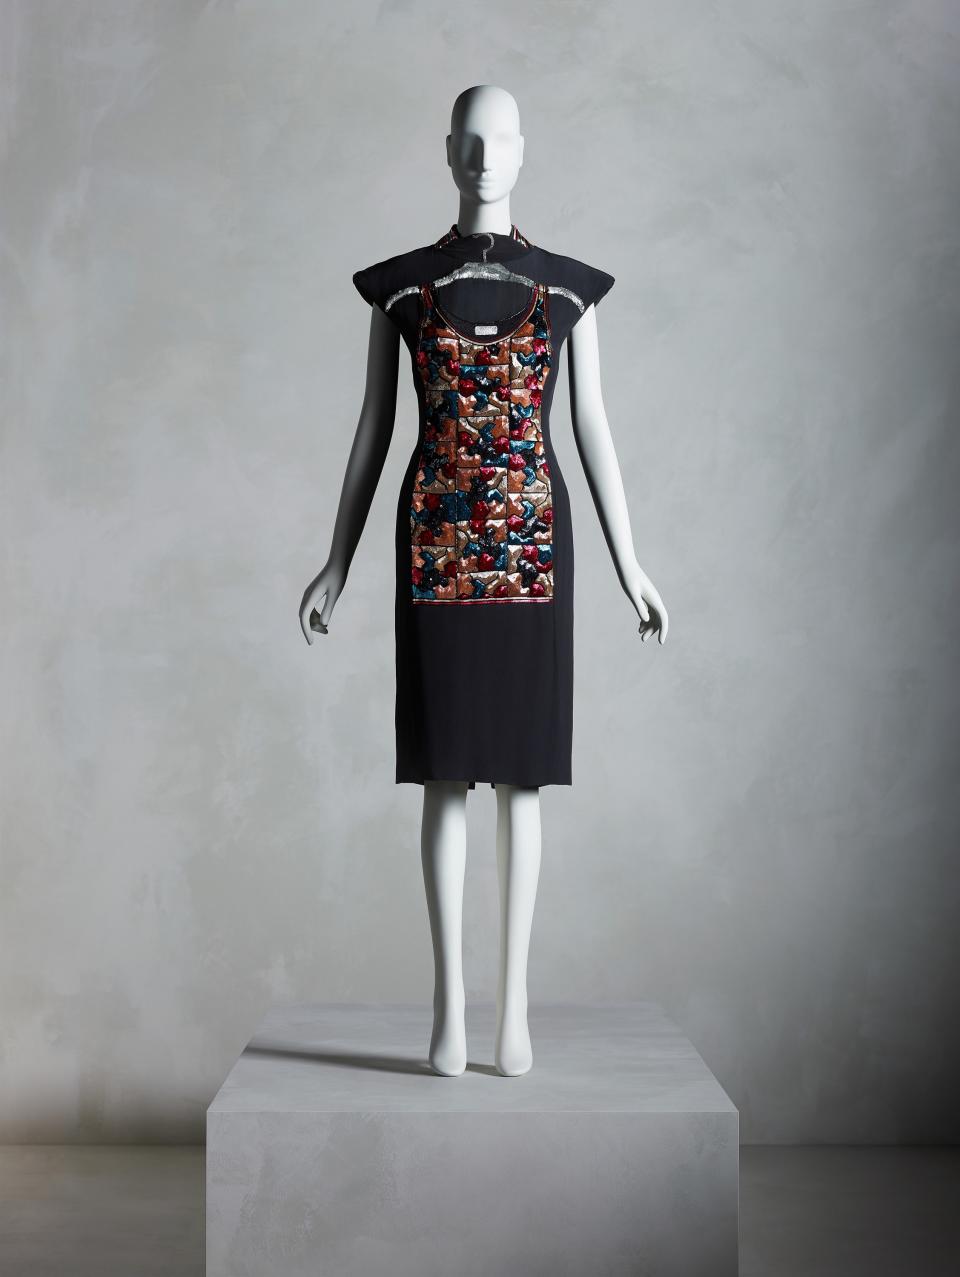 Dress, Karl Lagerfeld (French, born Germany, 1938 – 2019) for Chloé (French, founded 1952), spring/summer 1984; Promised gift of Sandy Schreier.